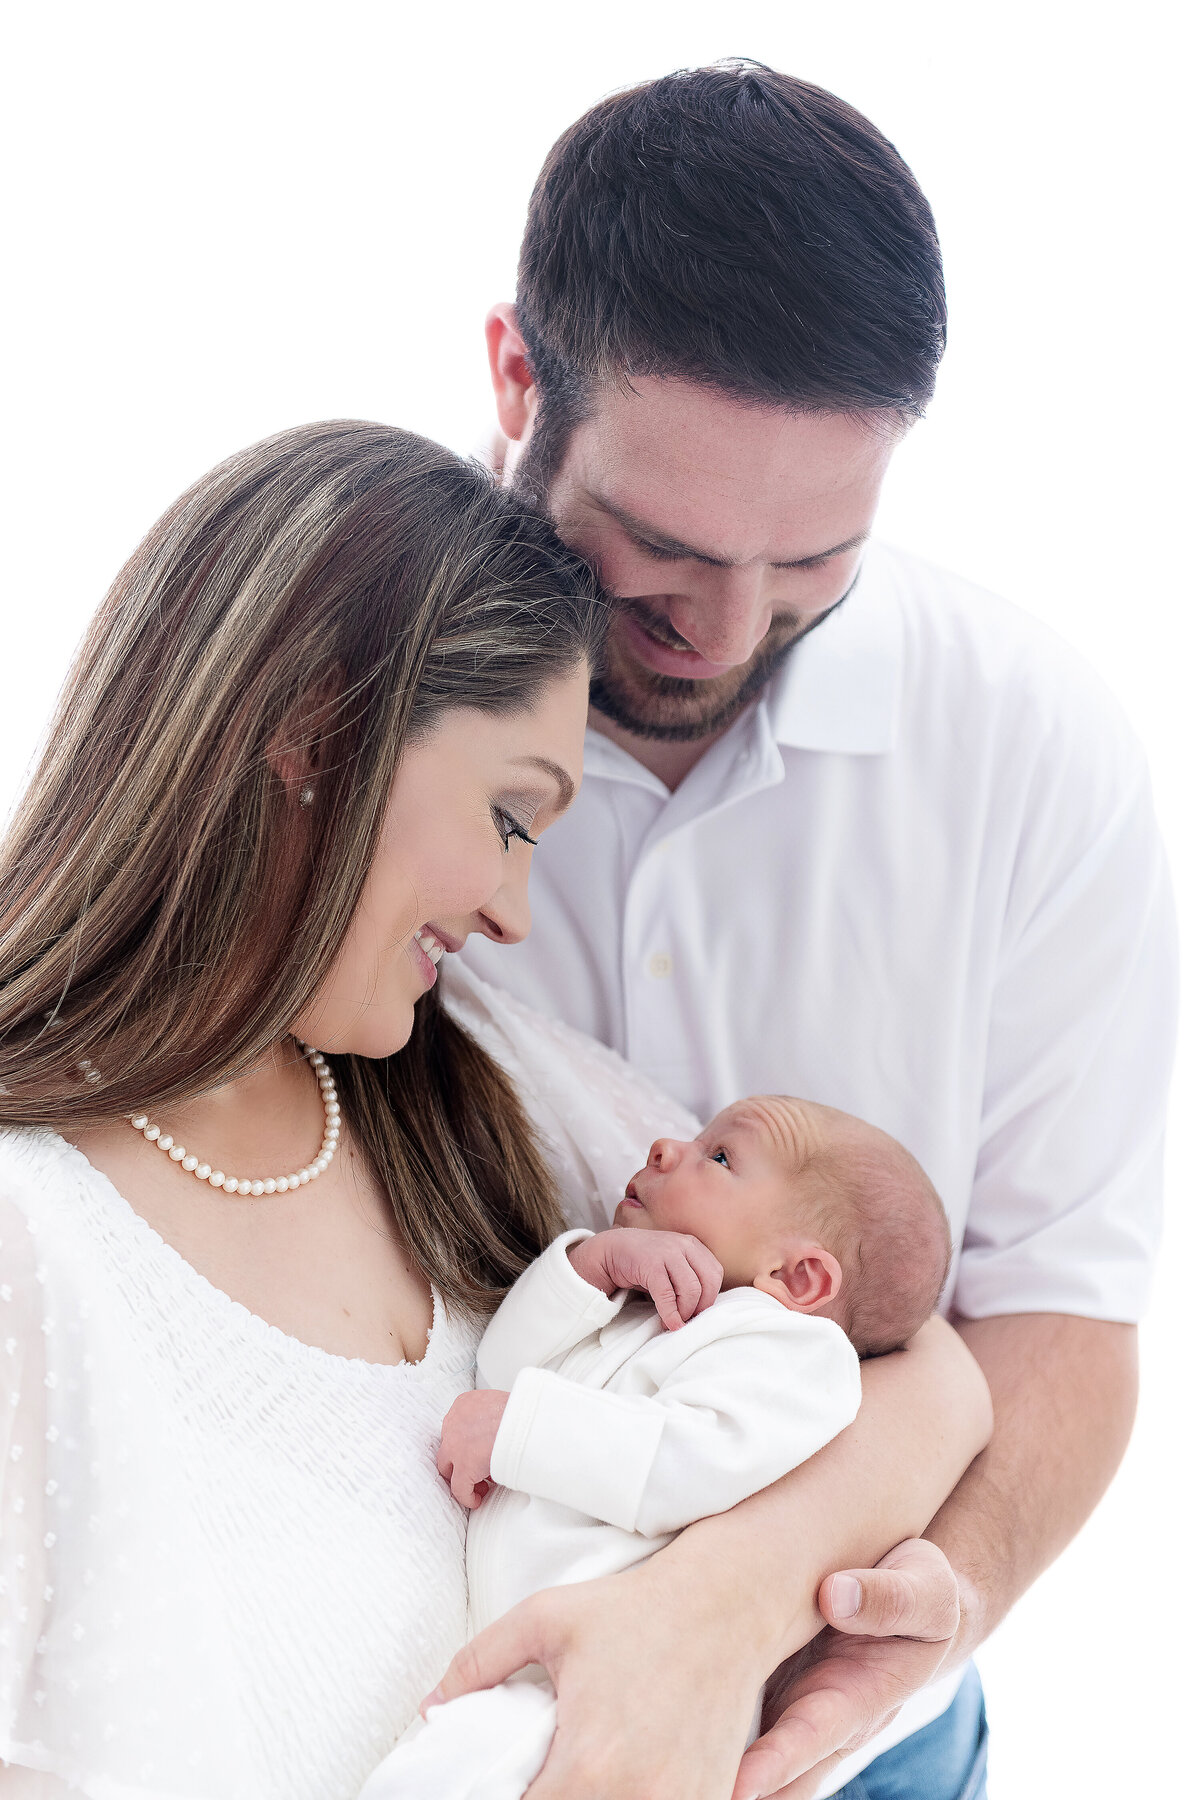 Happy parents smile down at their awake newborn baby while they cradle it standing in a studio